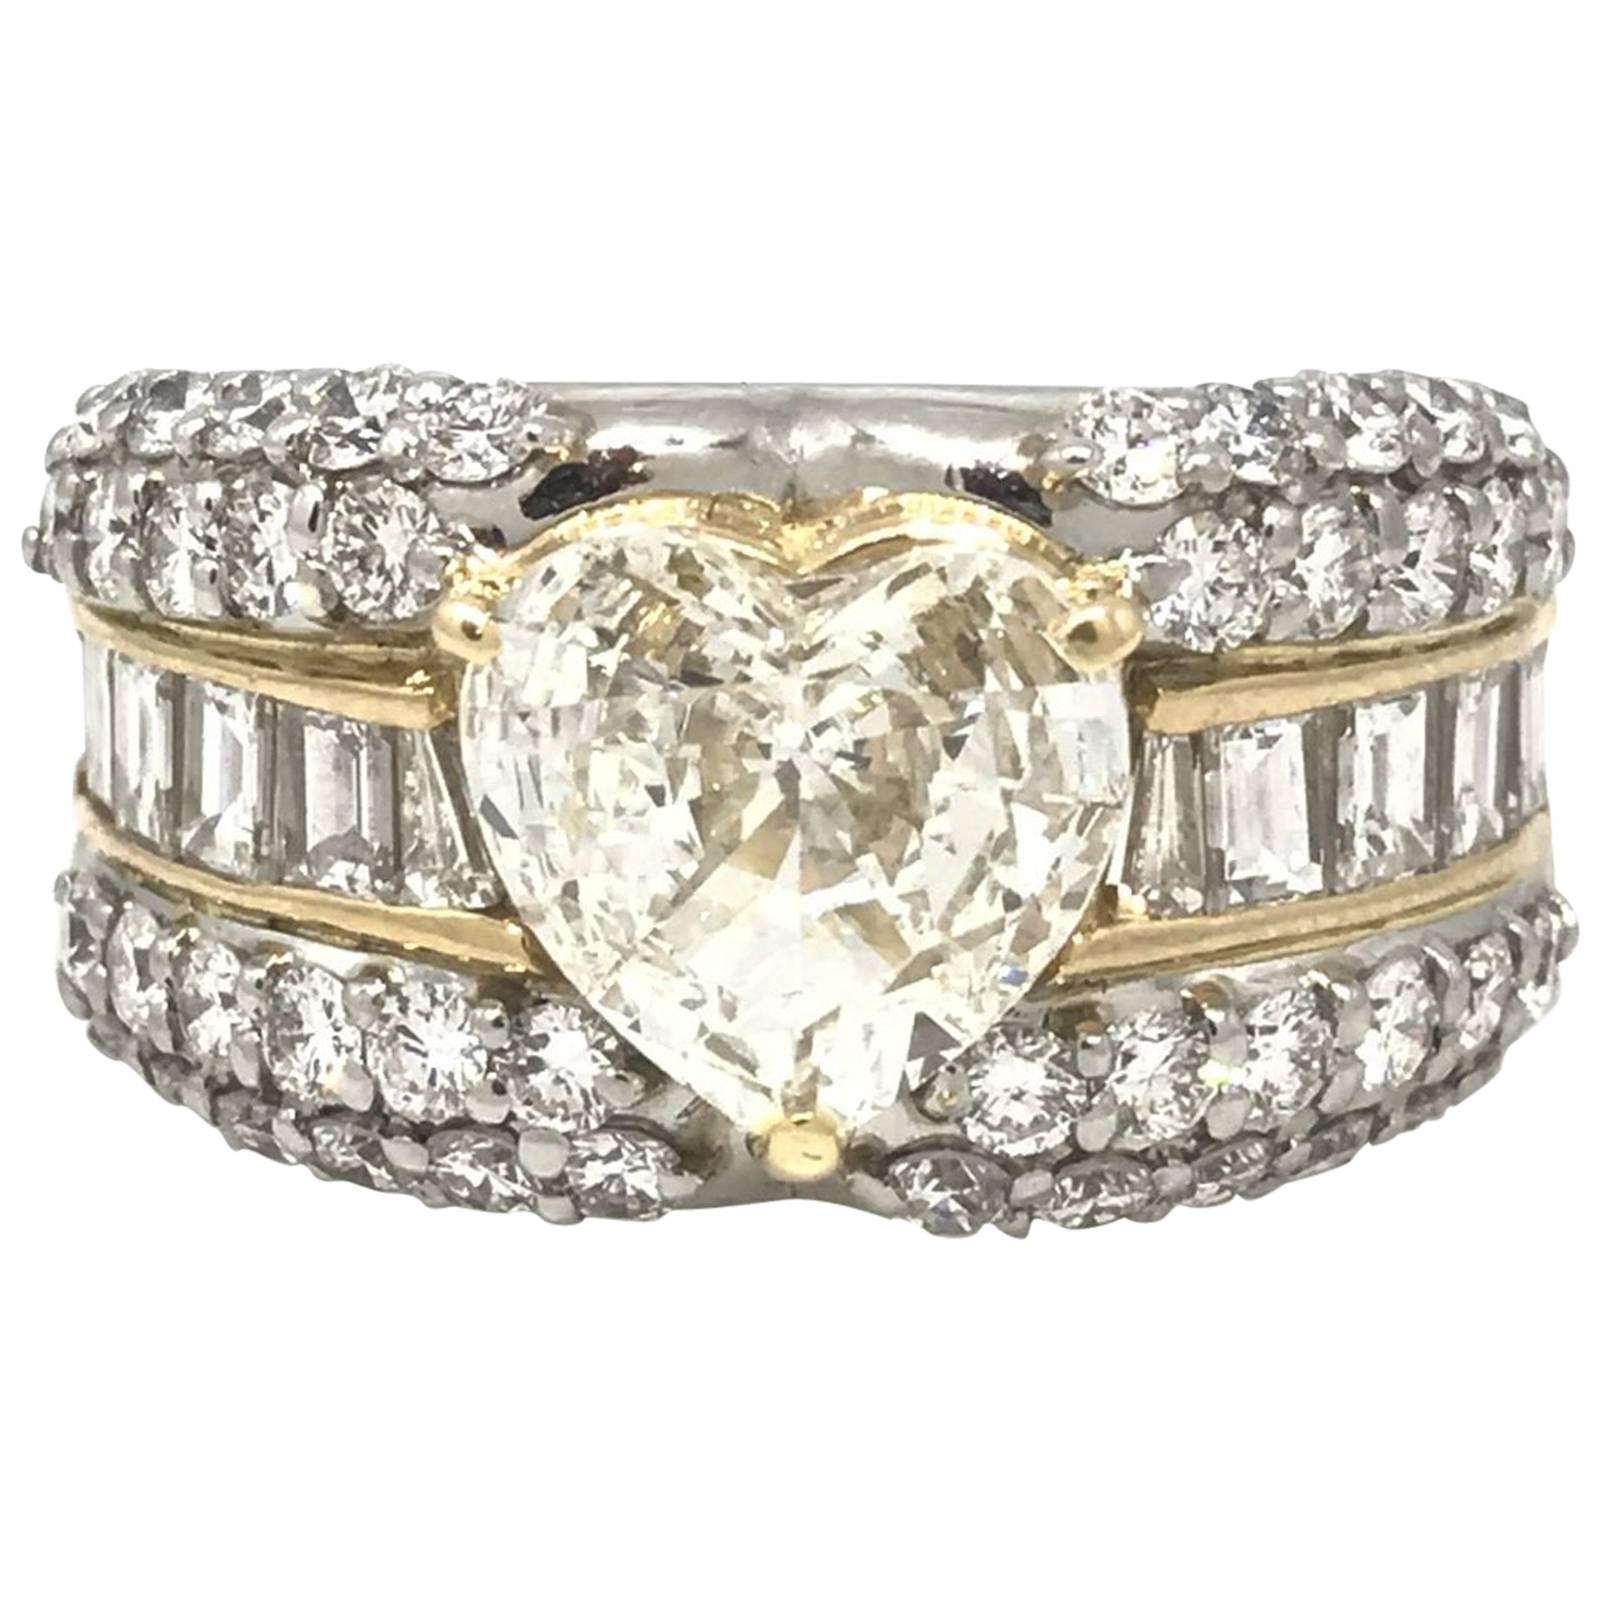 3.62 Carat Heart-Shape Diamond Platinum Ring with Rounds and Baguettes For Sale